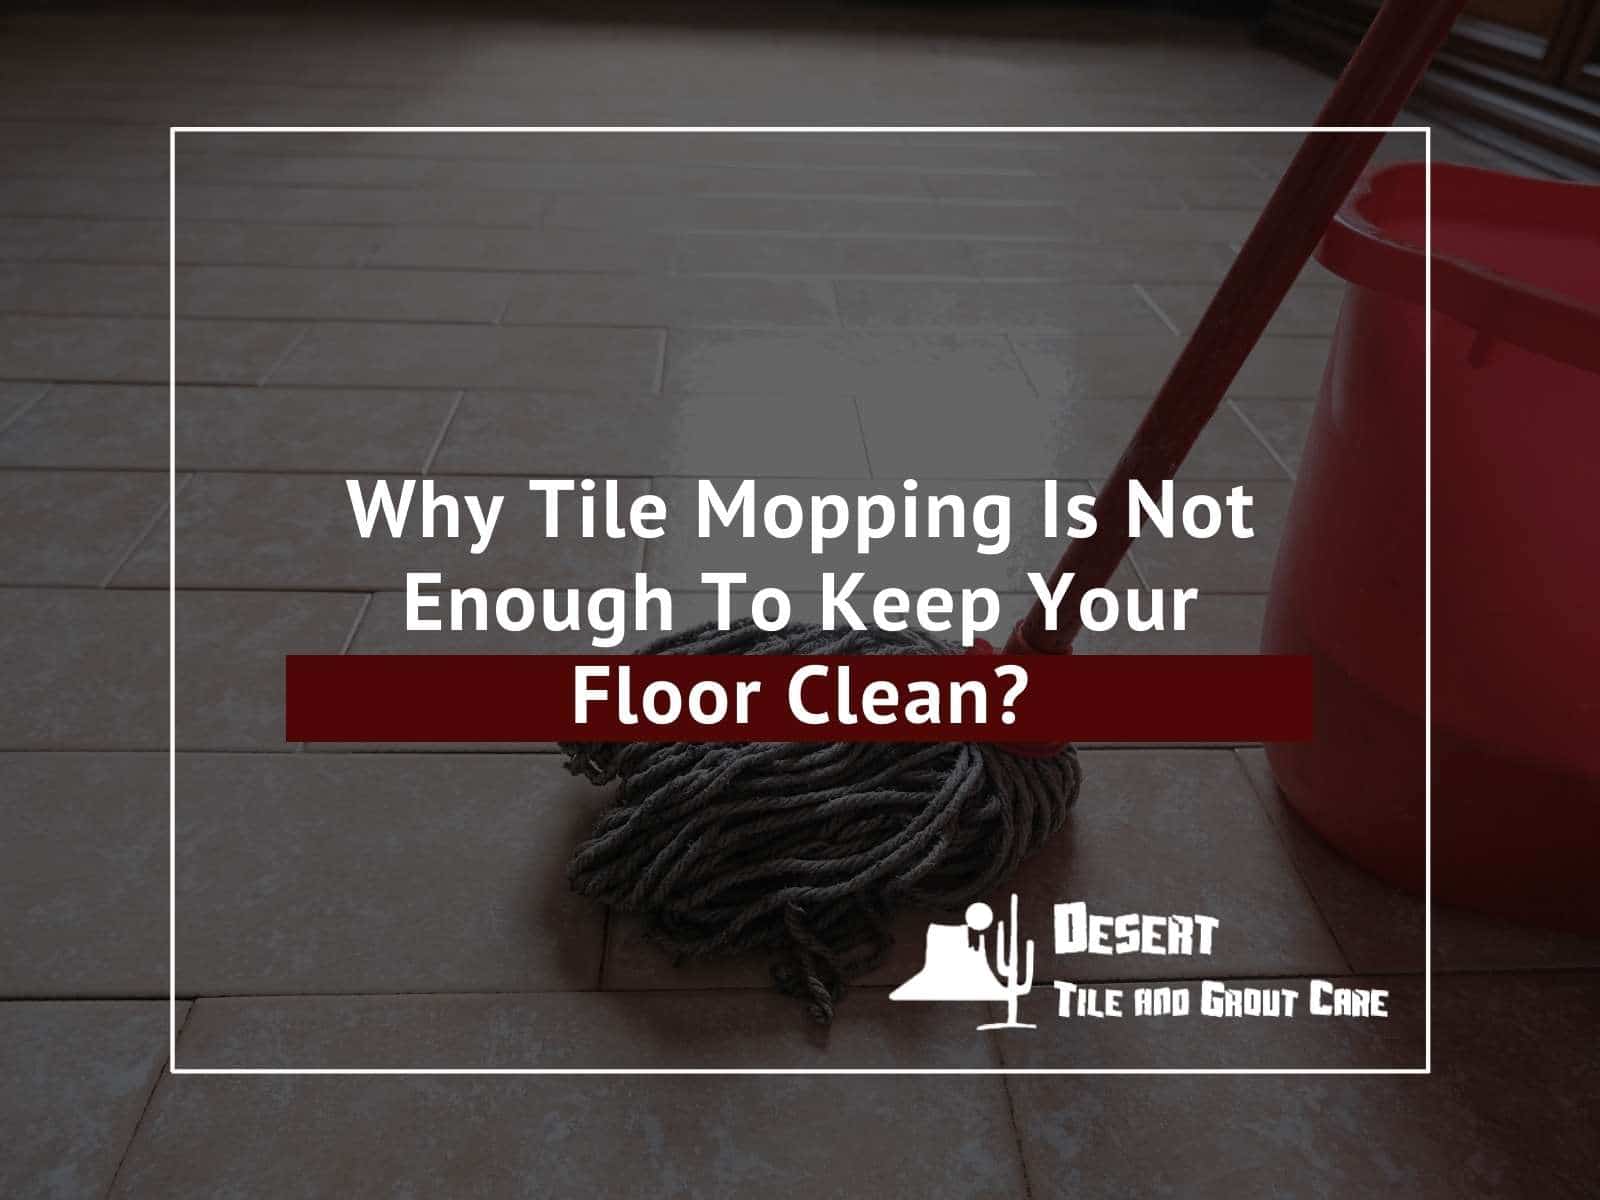 Why Tile Mopping Is Not Enough To Keep Your Floor Clean